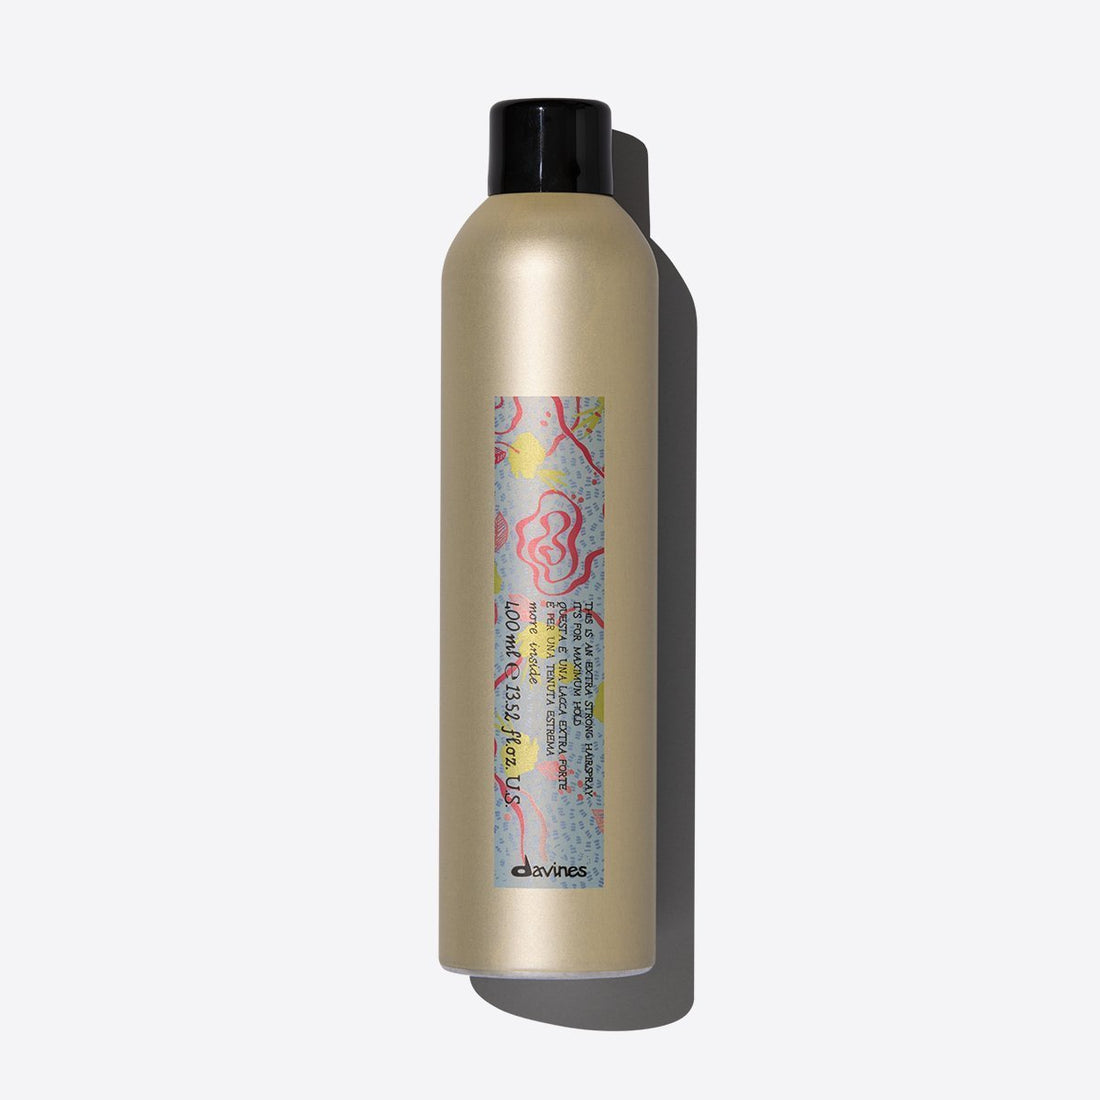 This is an Extra Strong Hairspray, More Inside -Queen’s Shop